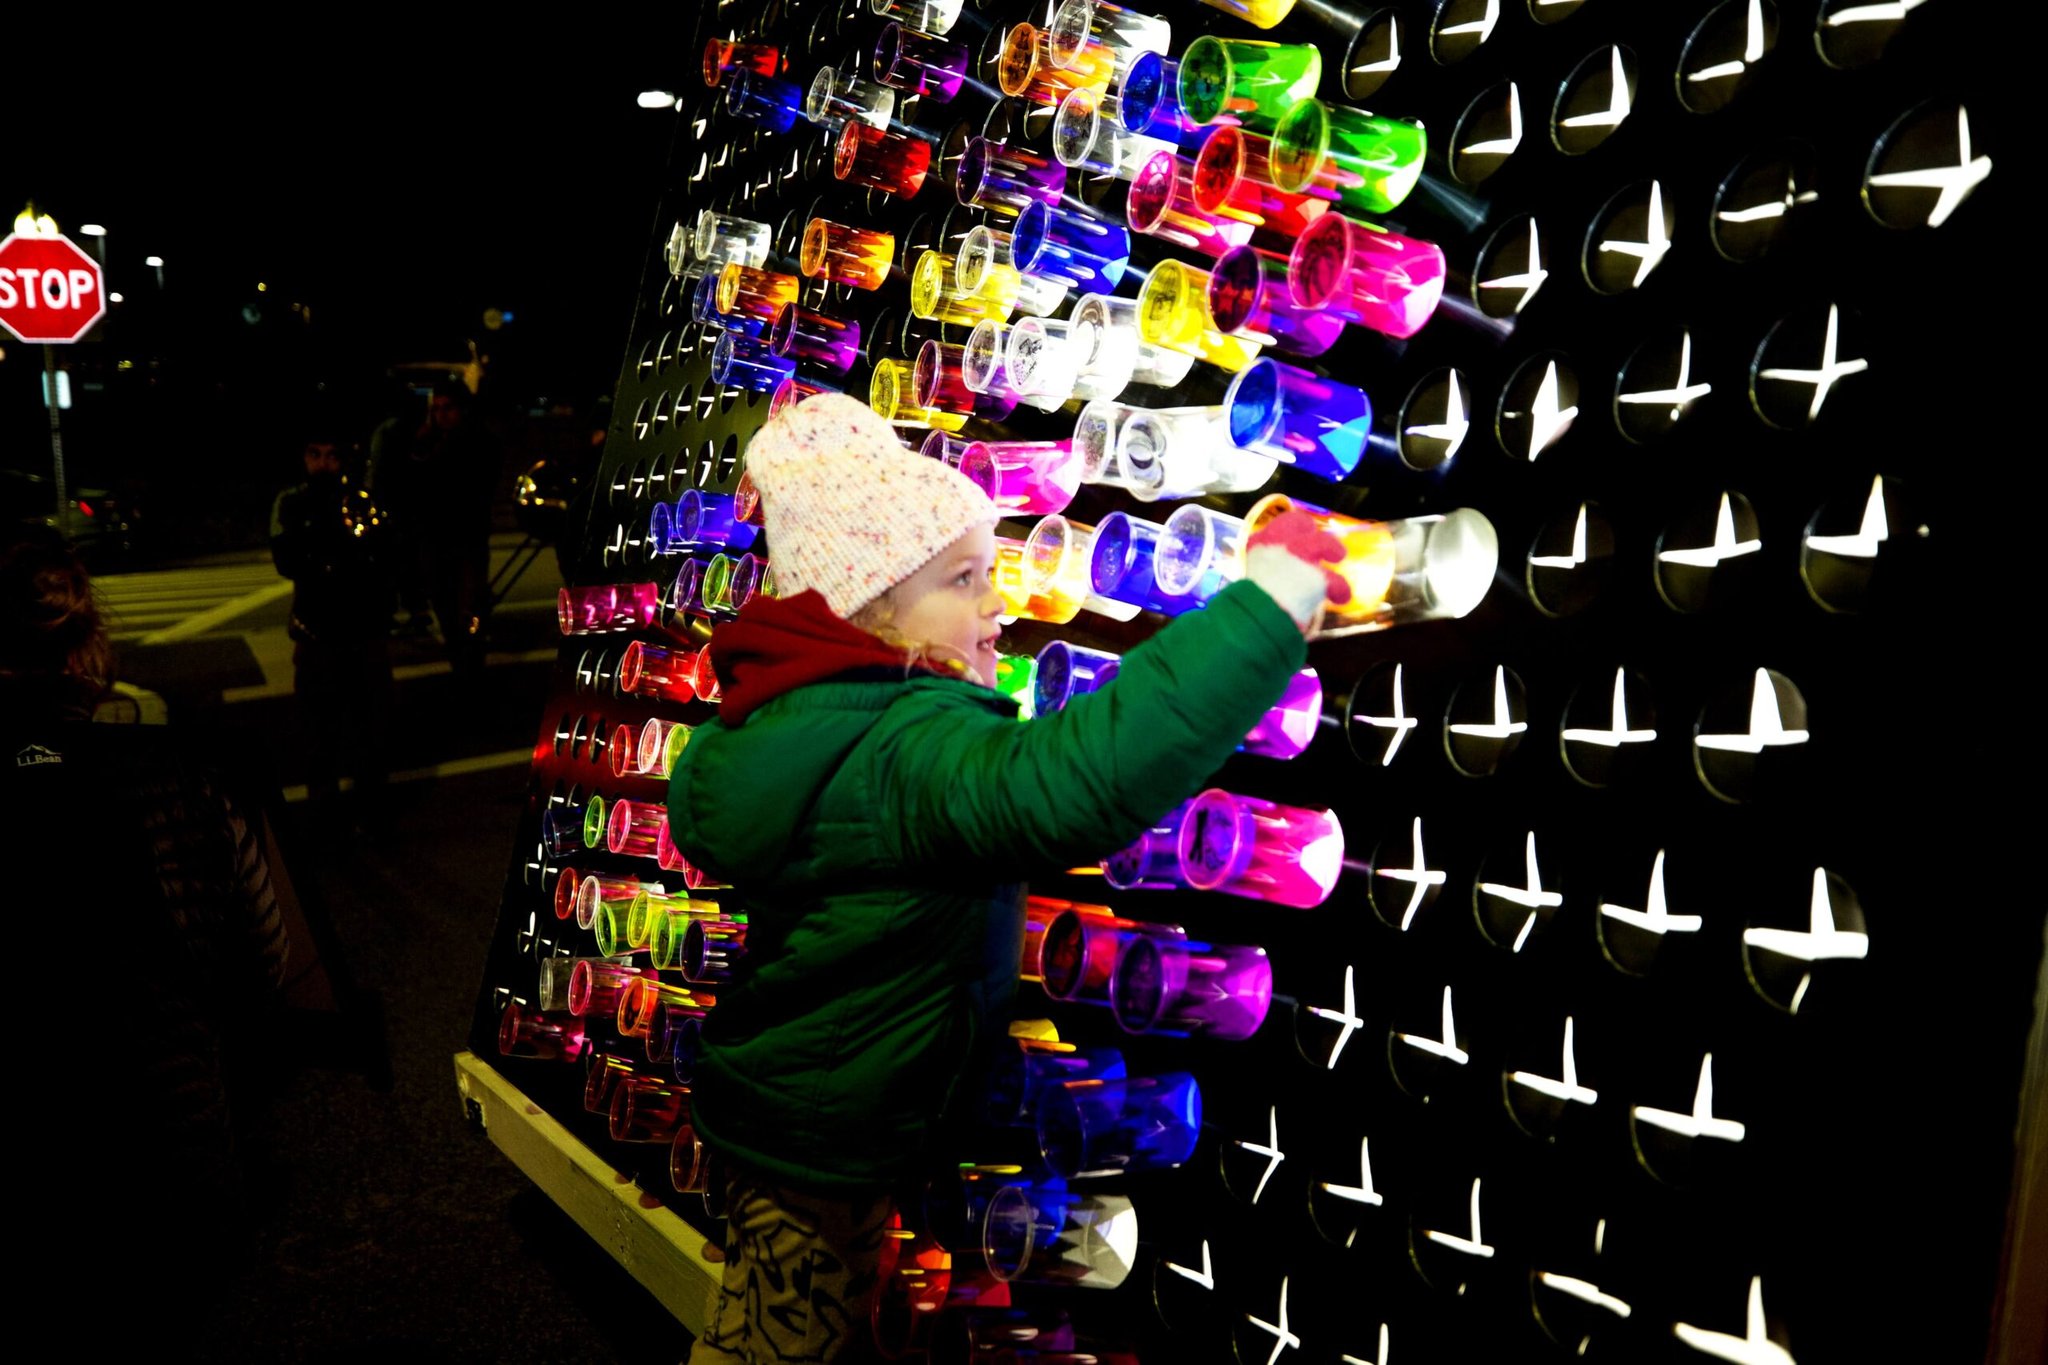 Image of small child wearing a winter coat and hat, reaching for the light peg board which make up the Brighter Ignited art installation.